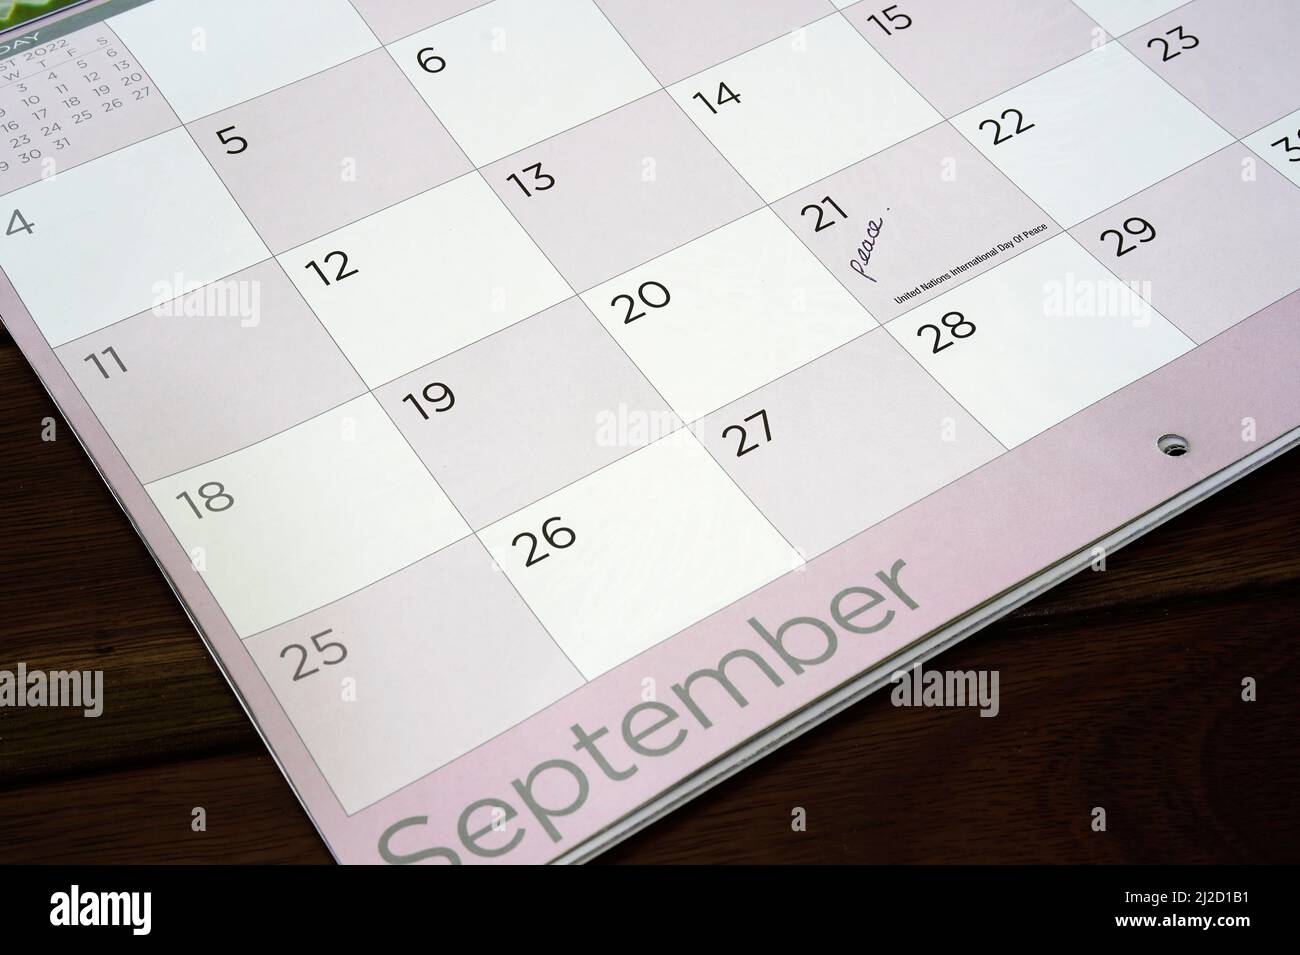 calendar with international day of peace highlighted Stock Photo